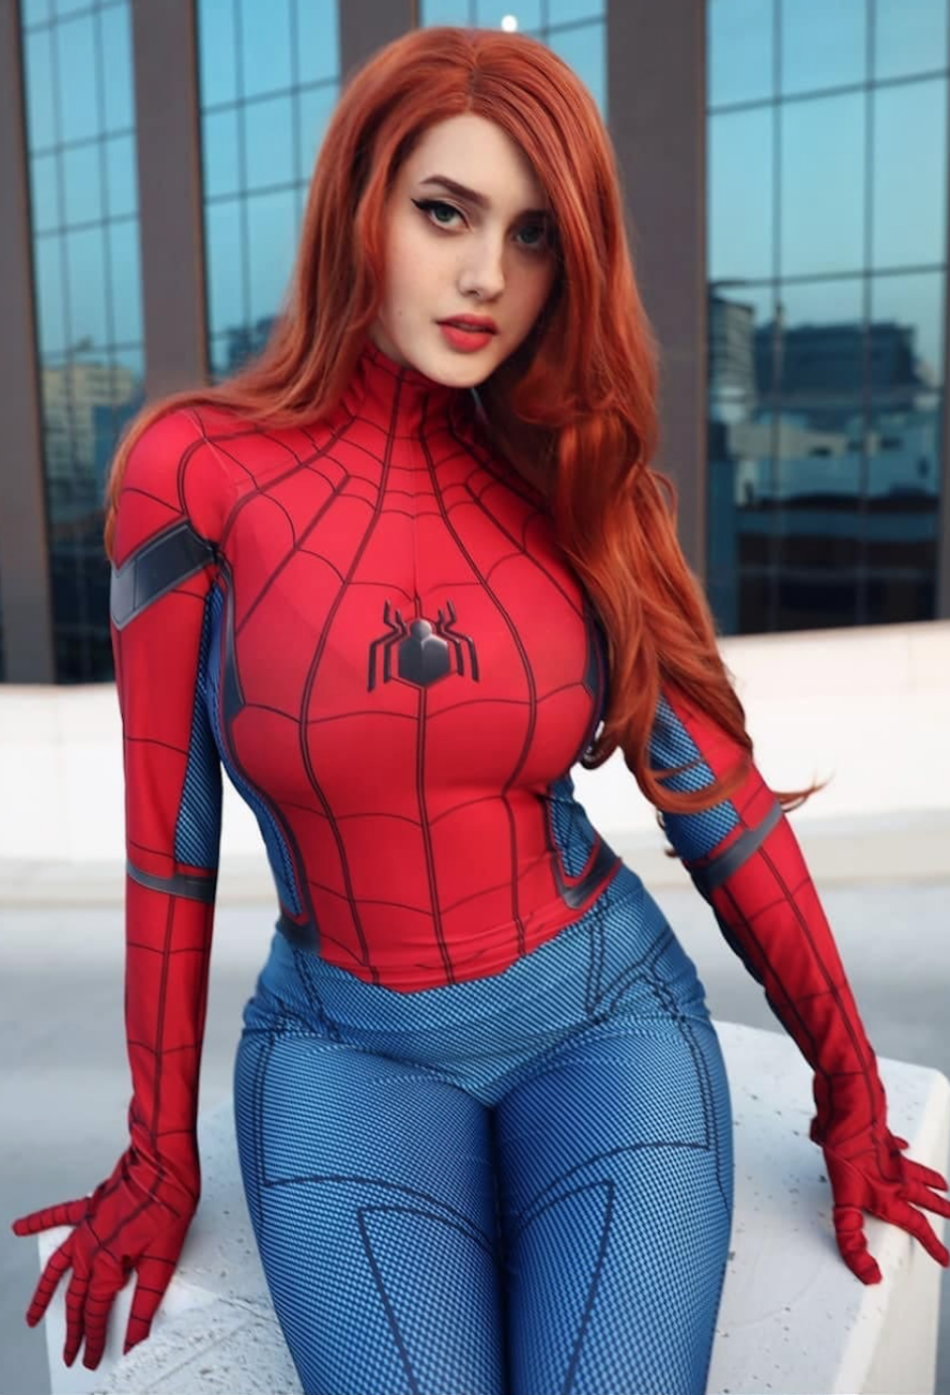 Sexy Red Hot Cosplay Girls Spiderman Women Best Photo Compilation 2021 (89 HQ Photos) 140